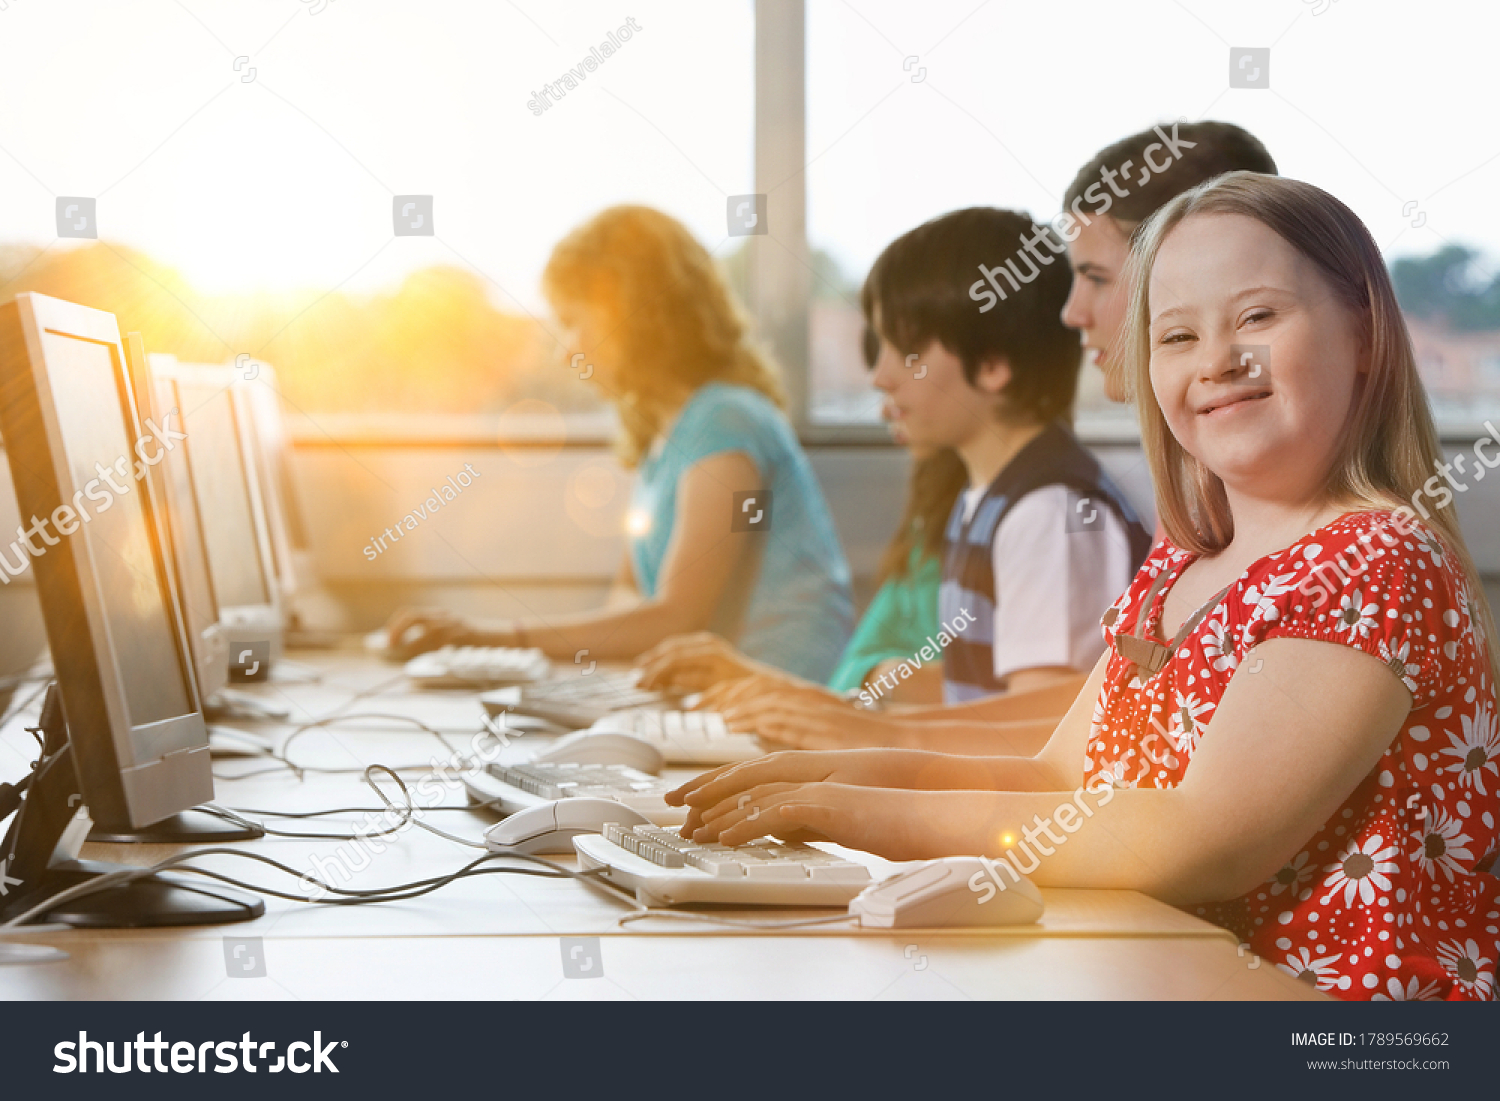 Girl with Down syndrome using computer at school #1789569662